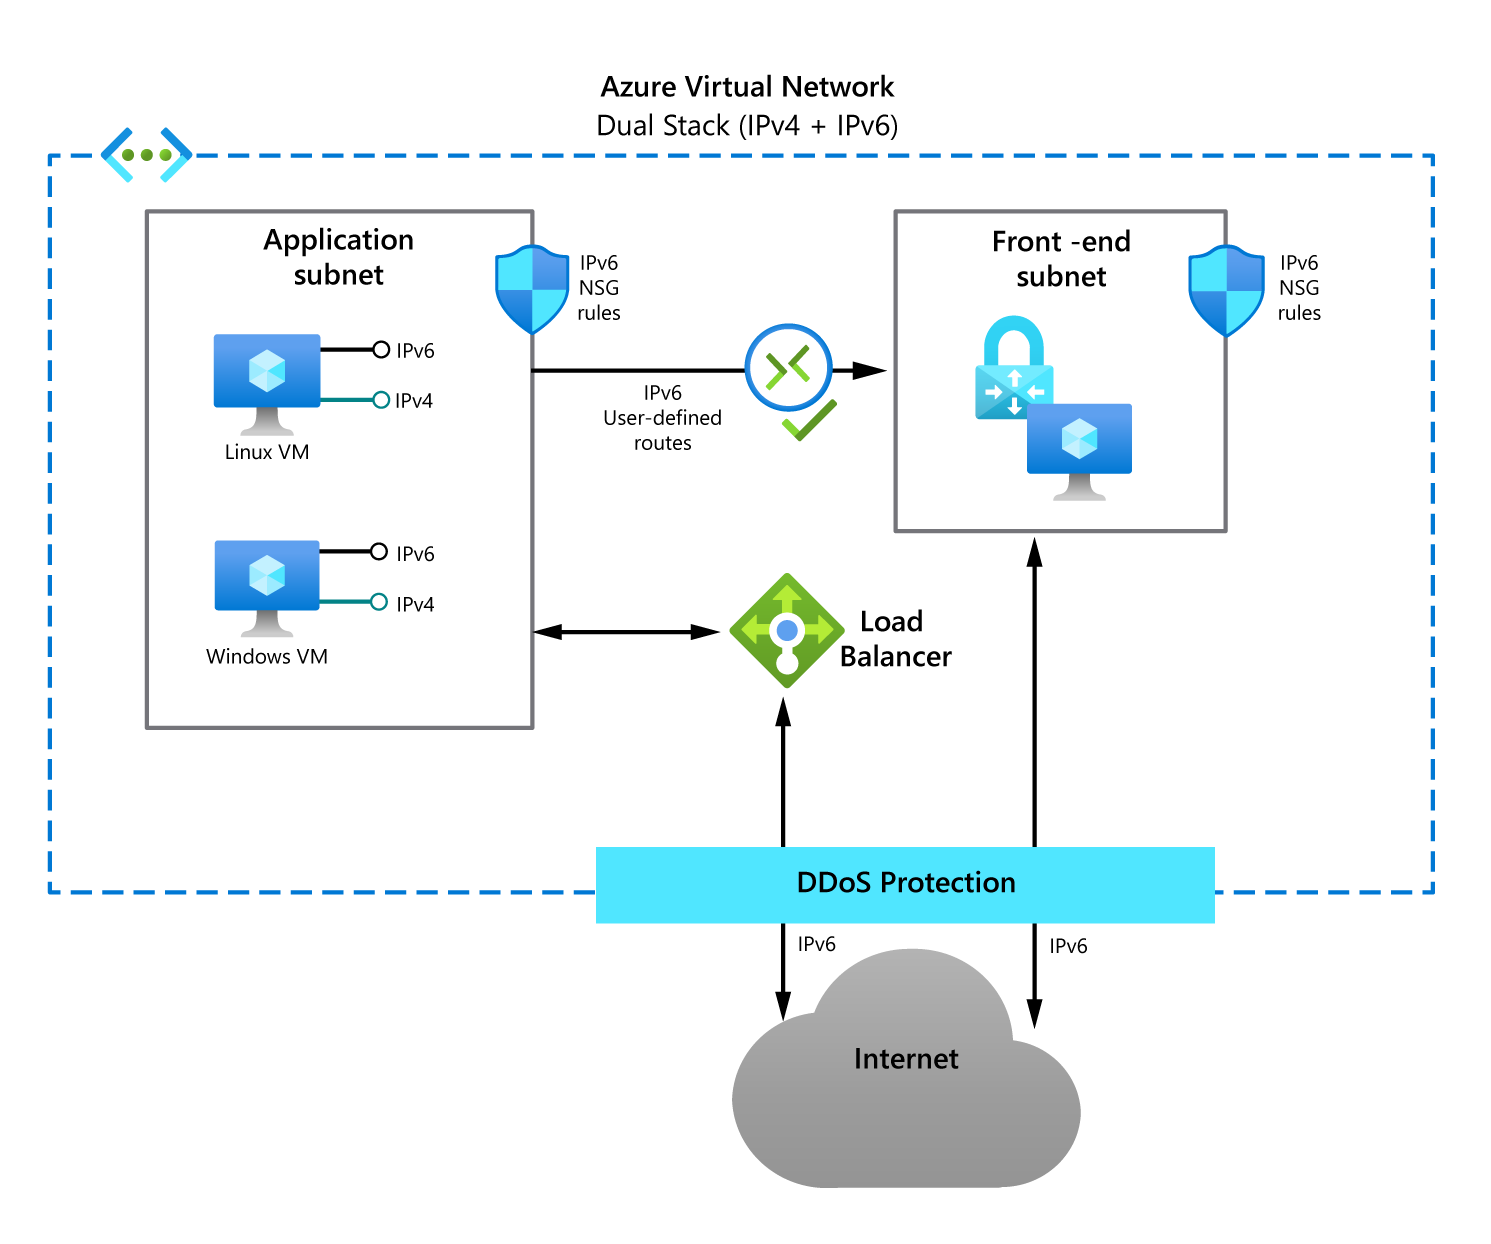 A diagram of the Azure Virtual Network dual stack. An application subnet contains two VMs: one Linux and one Windows, both with IPv4 and IPv6 addresses. A network security group protects these hosts. A load balancer connects the application subnet with the IPv6 internet via DDoS protection. IPv6 user-defined routes connect the application subnet to a front-end subnet.